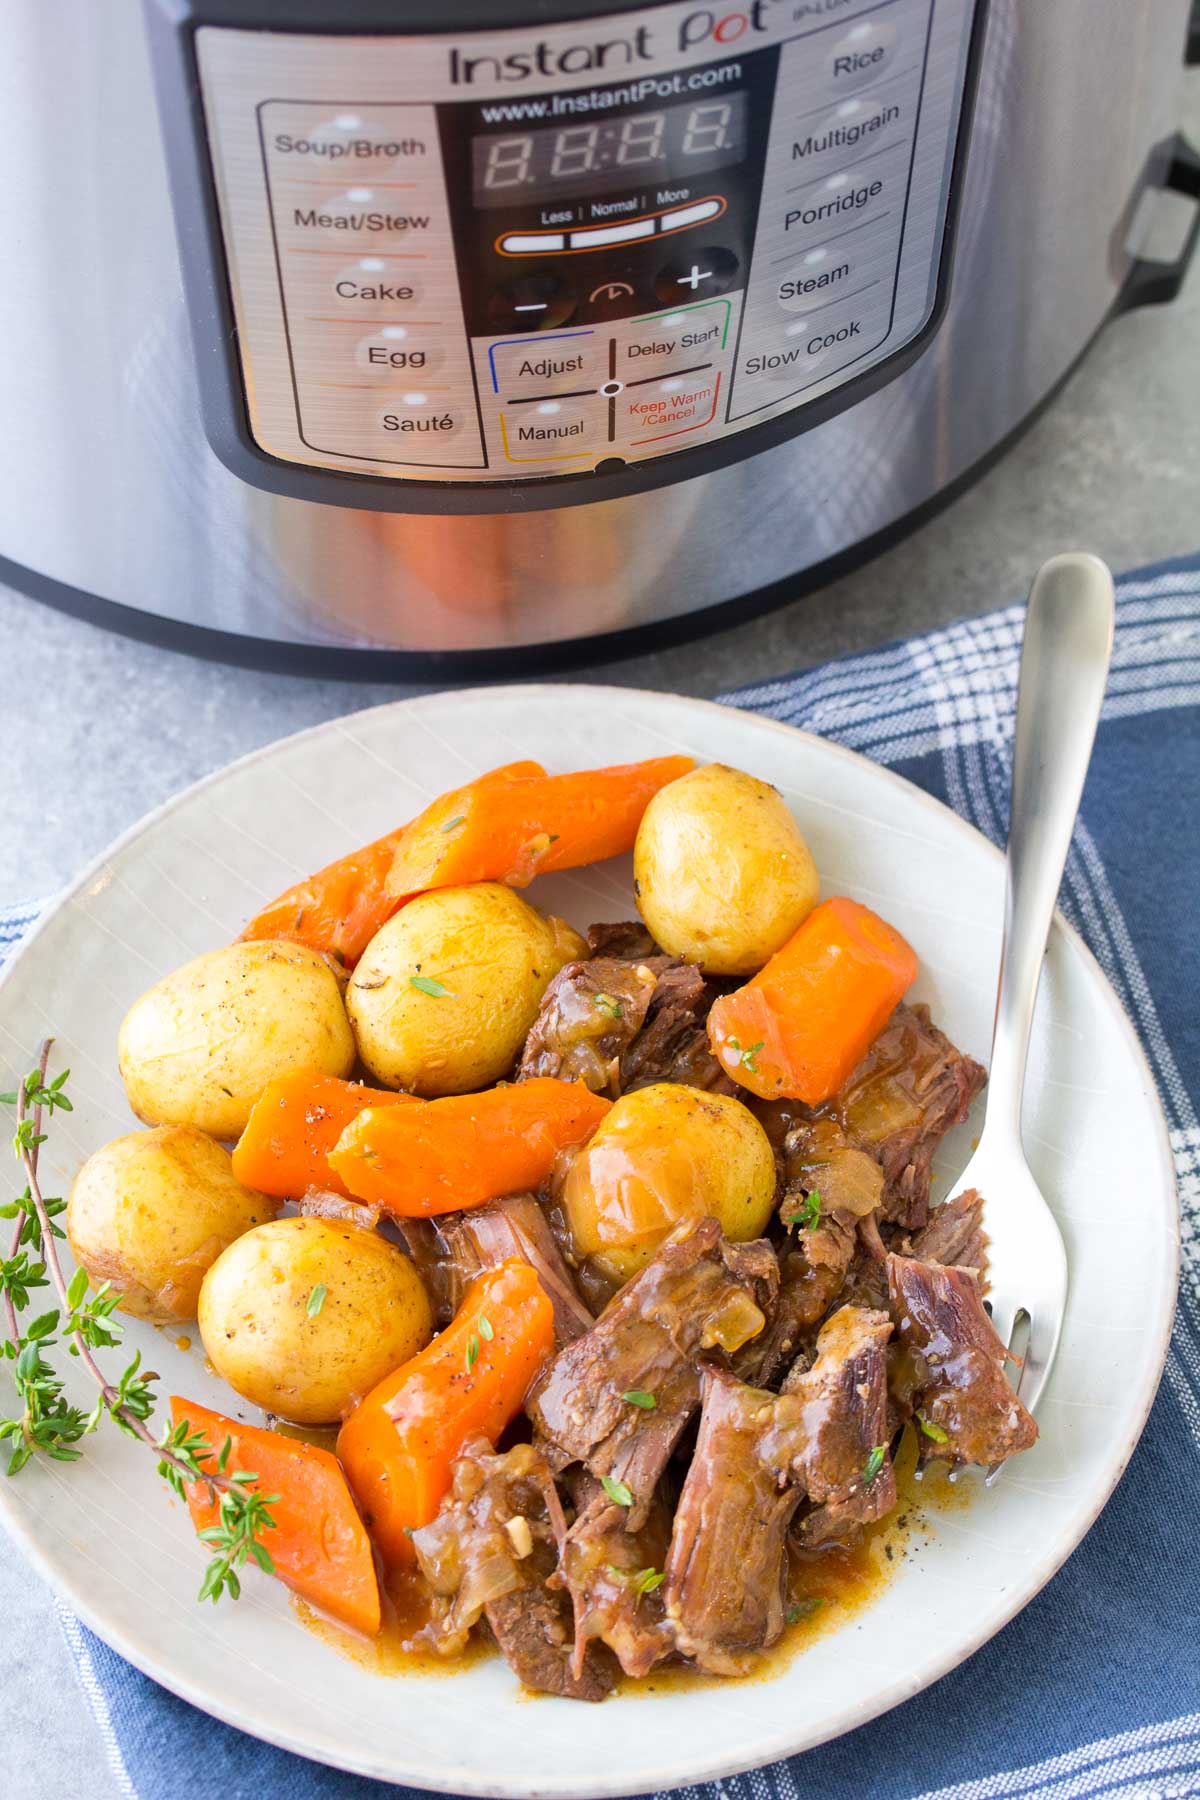 Pot roast with potatoes and carrots served on a plate, with instant pot in background.